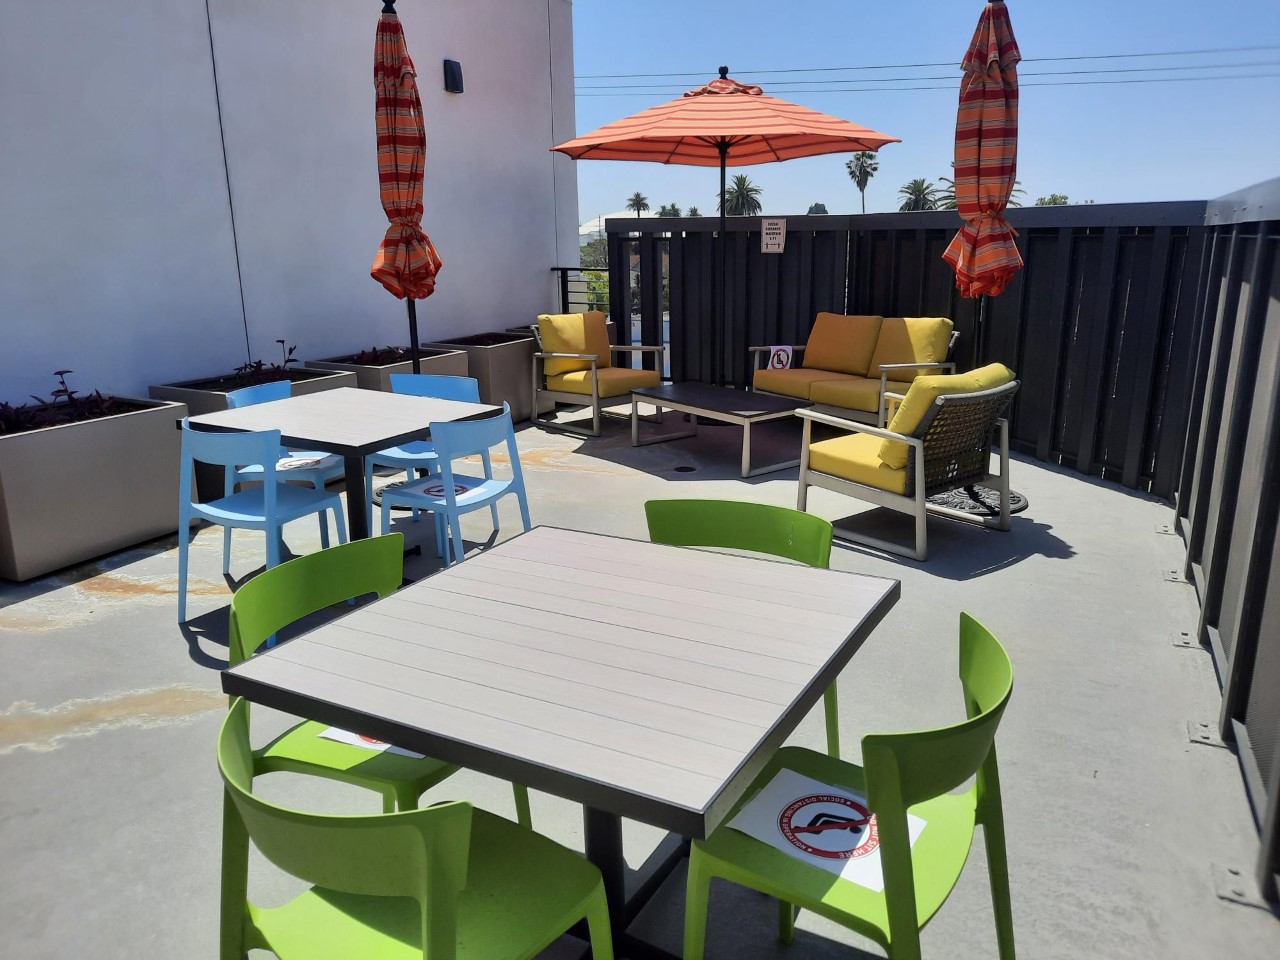 Outdoor deck area consisting of three tables, chairs, and sun umbrellas. This is surrounded by planters against a wall, and a fence closing off the area.